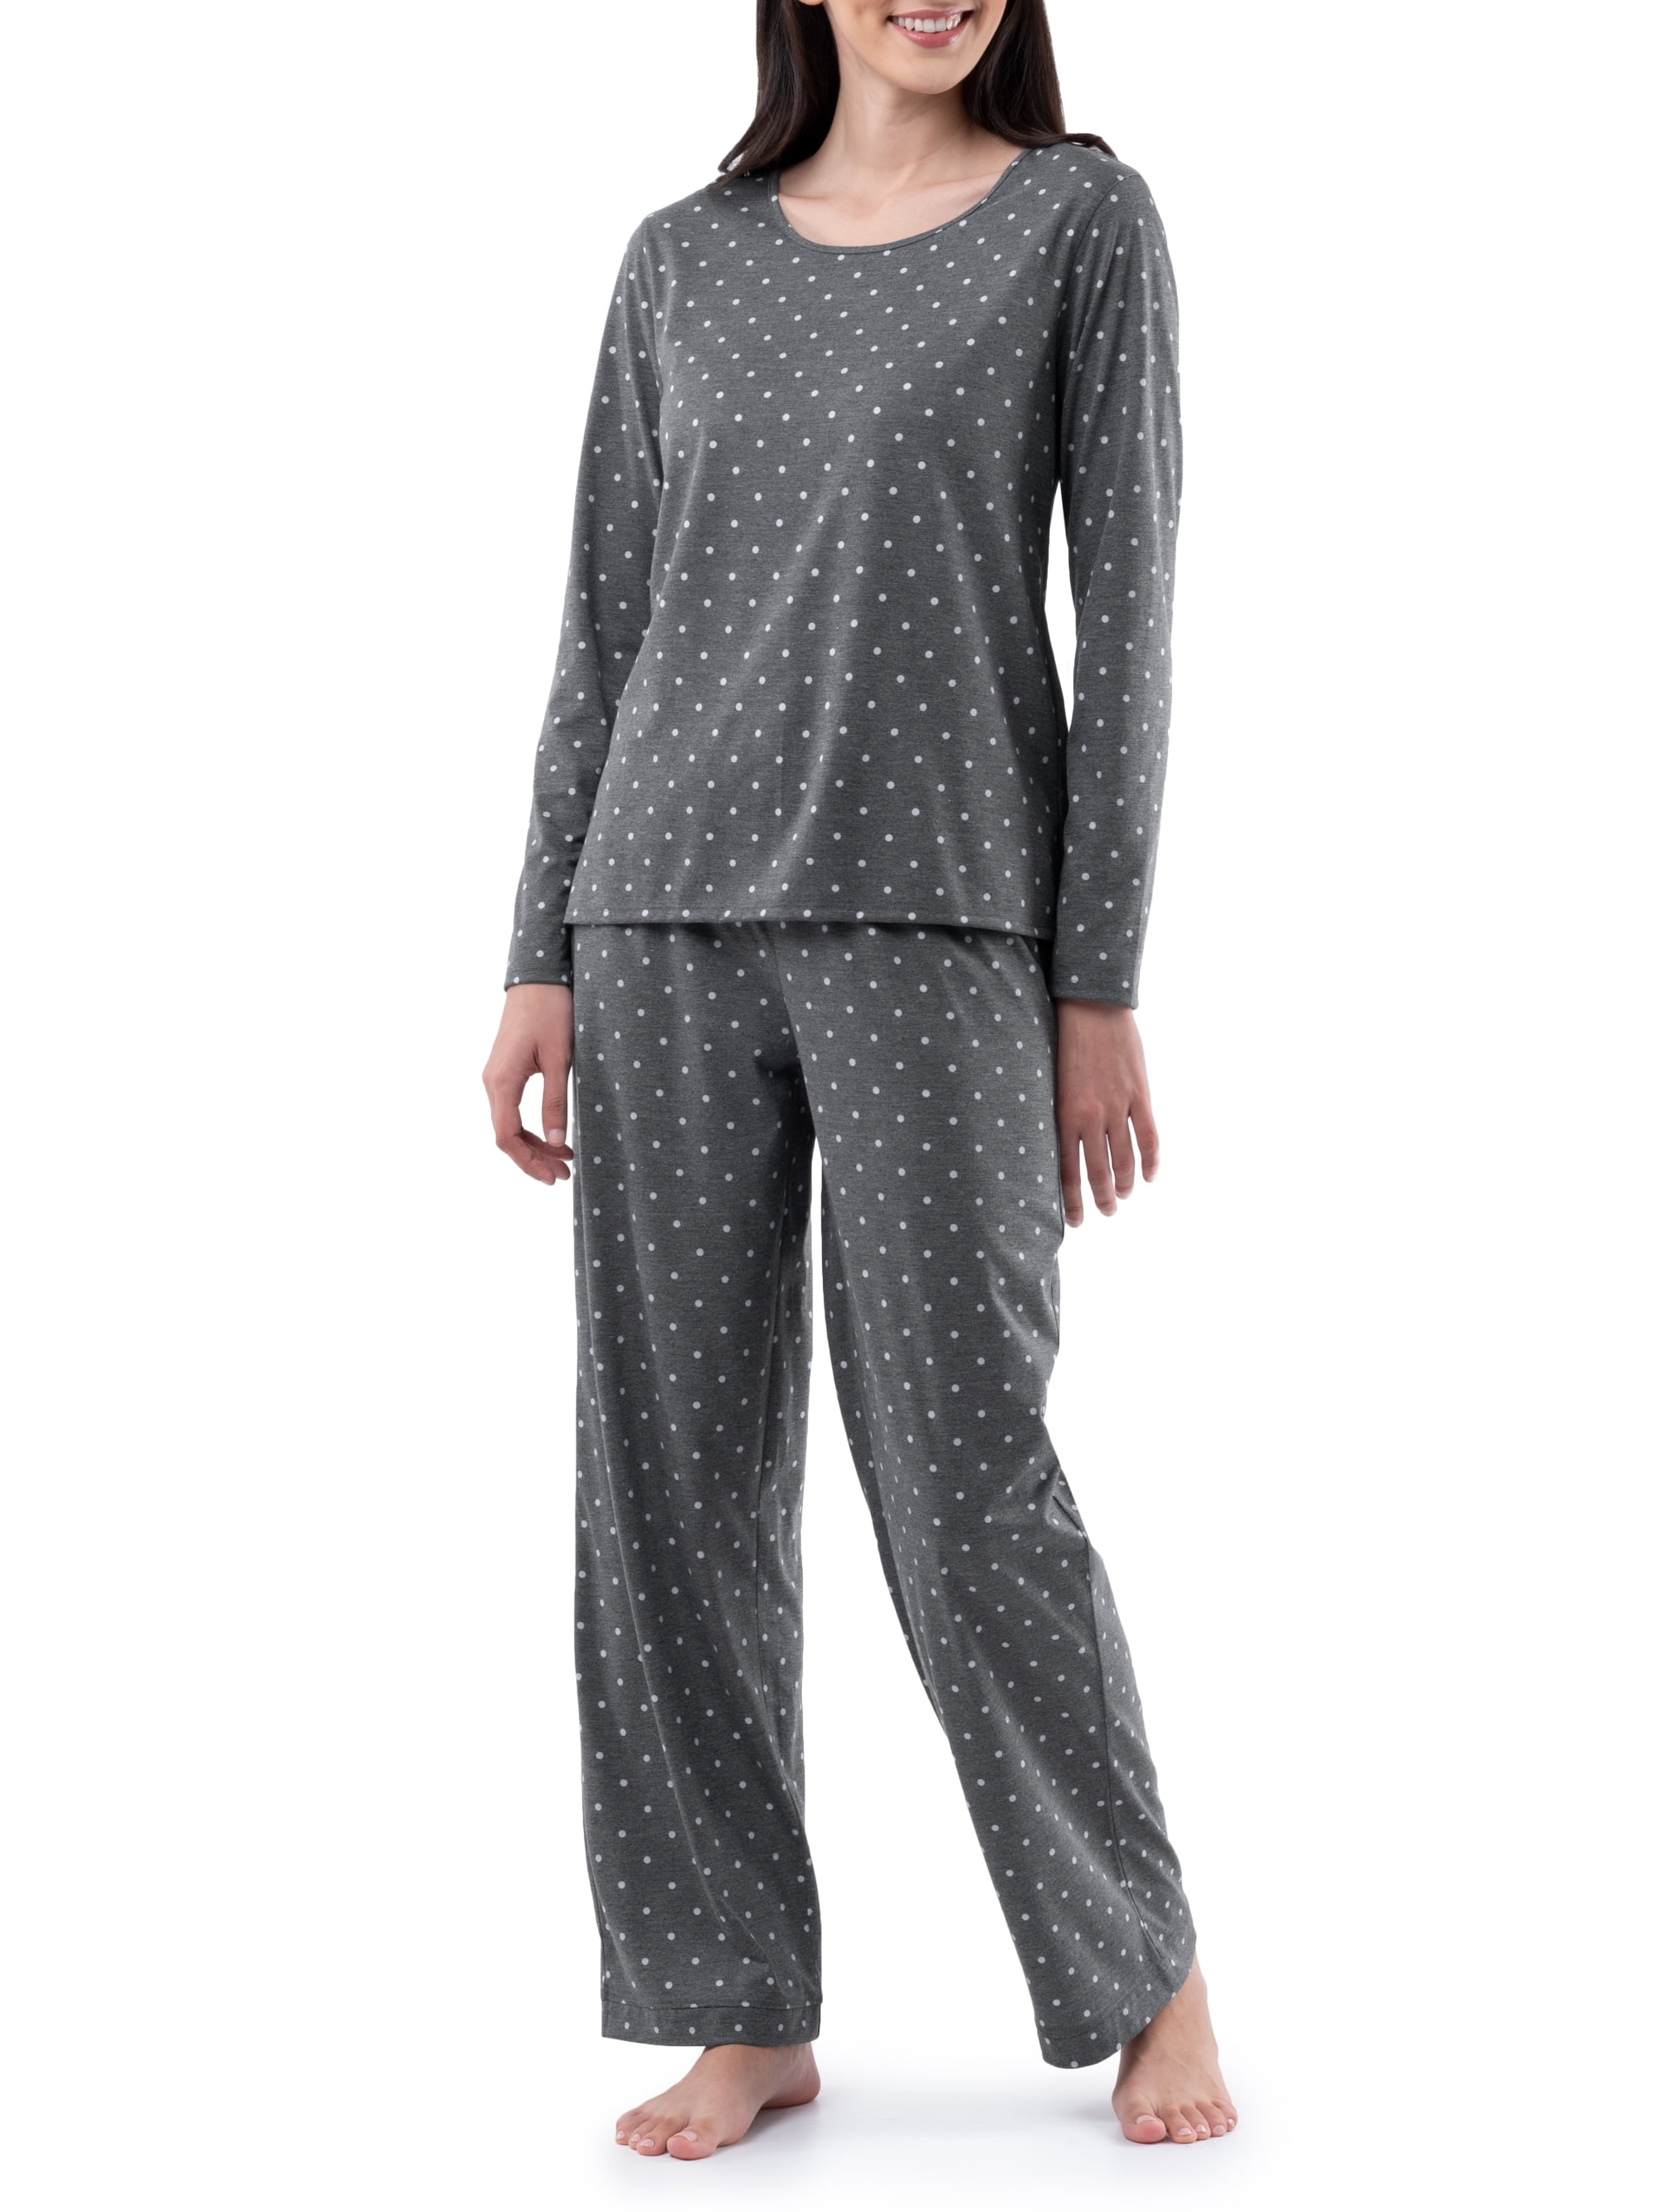 Fruit of the Loom Women\'s and Women\'s Plus Soft & Breathable Long Sleeve  Pajama Set, 2-Piece